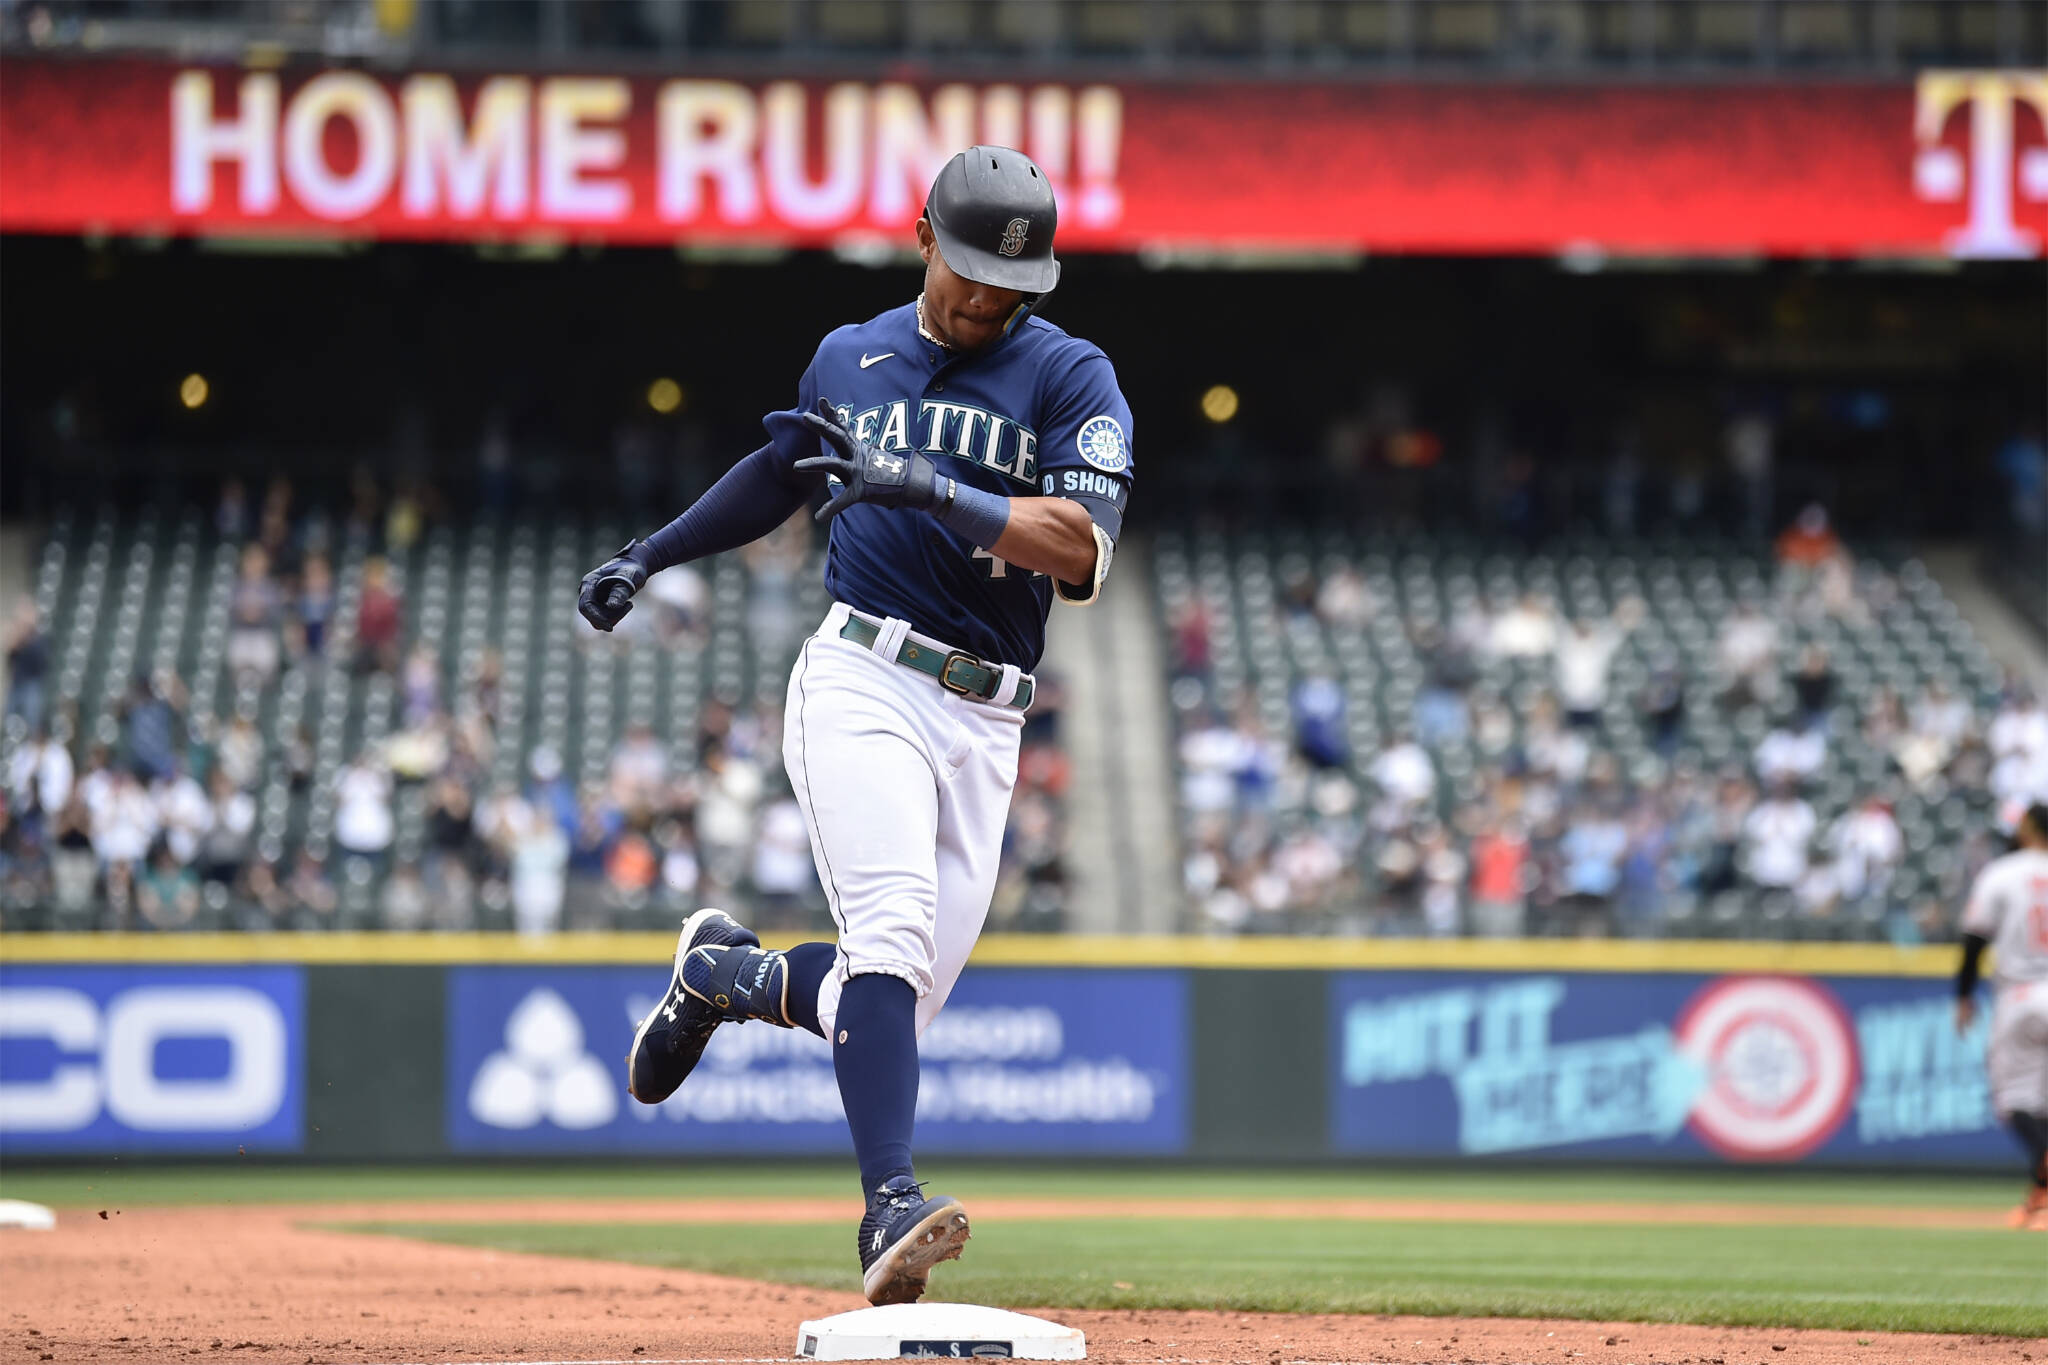 The Mariners’ Julio Rodriguez rounds the bases after hitting a two-run home run against the Orioles during a game Wednesday in Seattle. (AP Photo/Caean Couto)